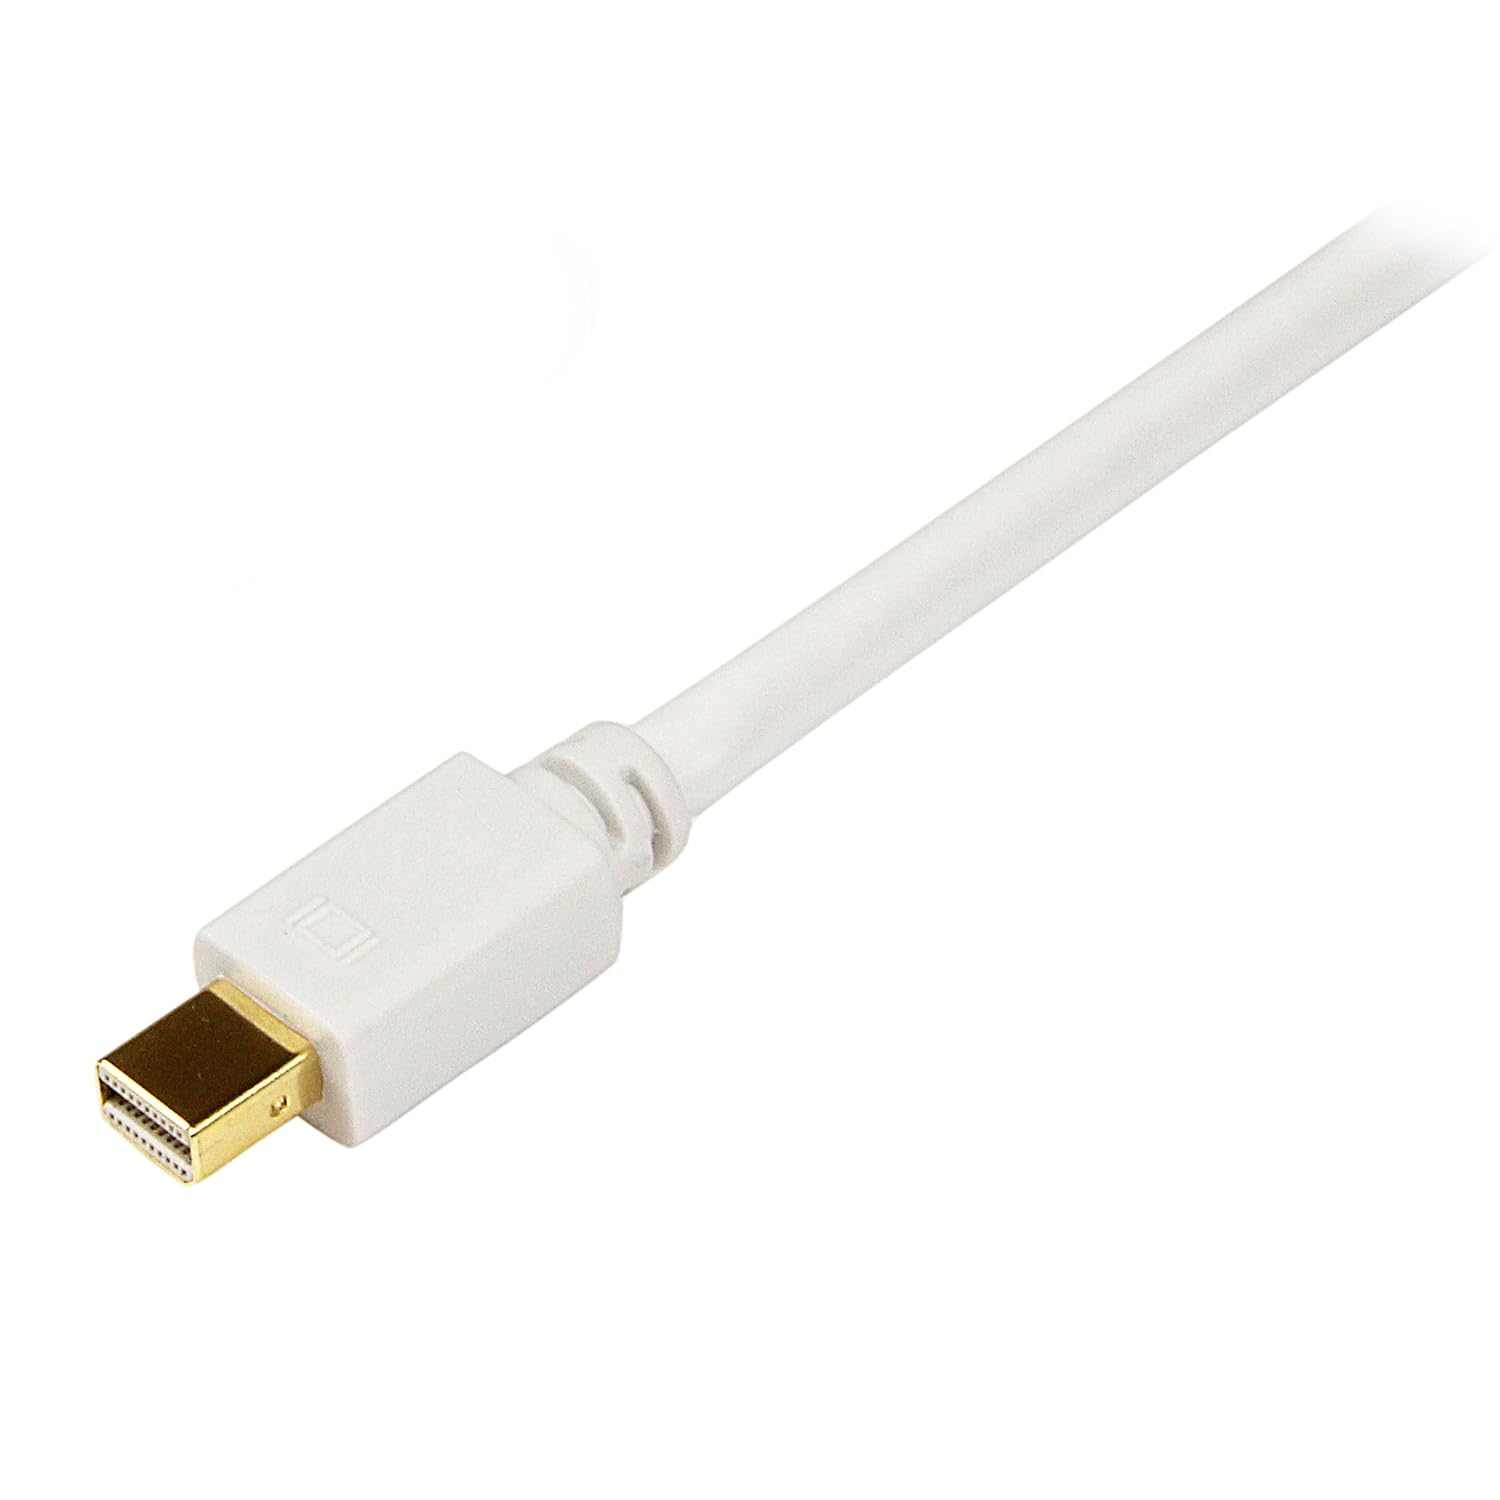 StarTech.com 6 ft Mini DisplayPort to DVI Adapter Cable - Mini DP to DVI Video Converter - MDP to DVI Cable for Mac / PC 1920x1200 - White (MDP2DVIMM6W)